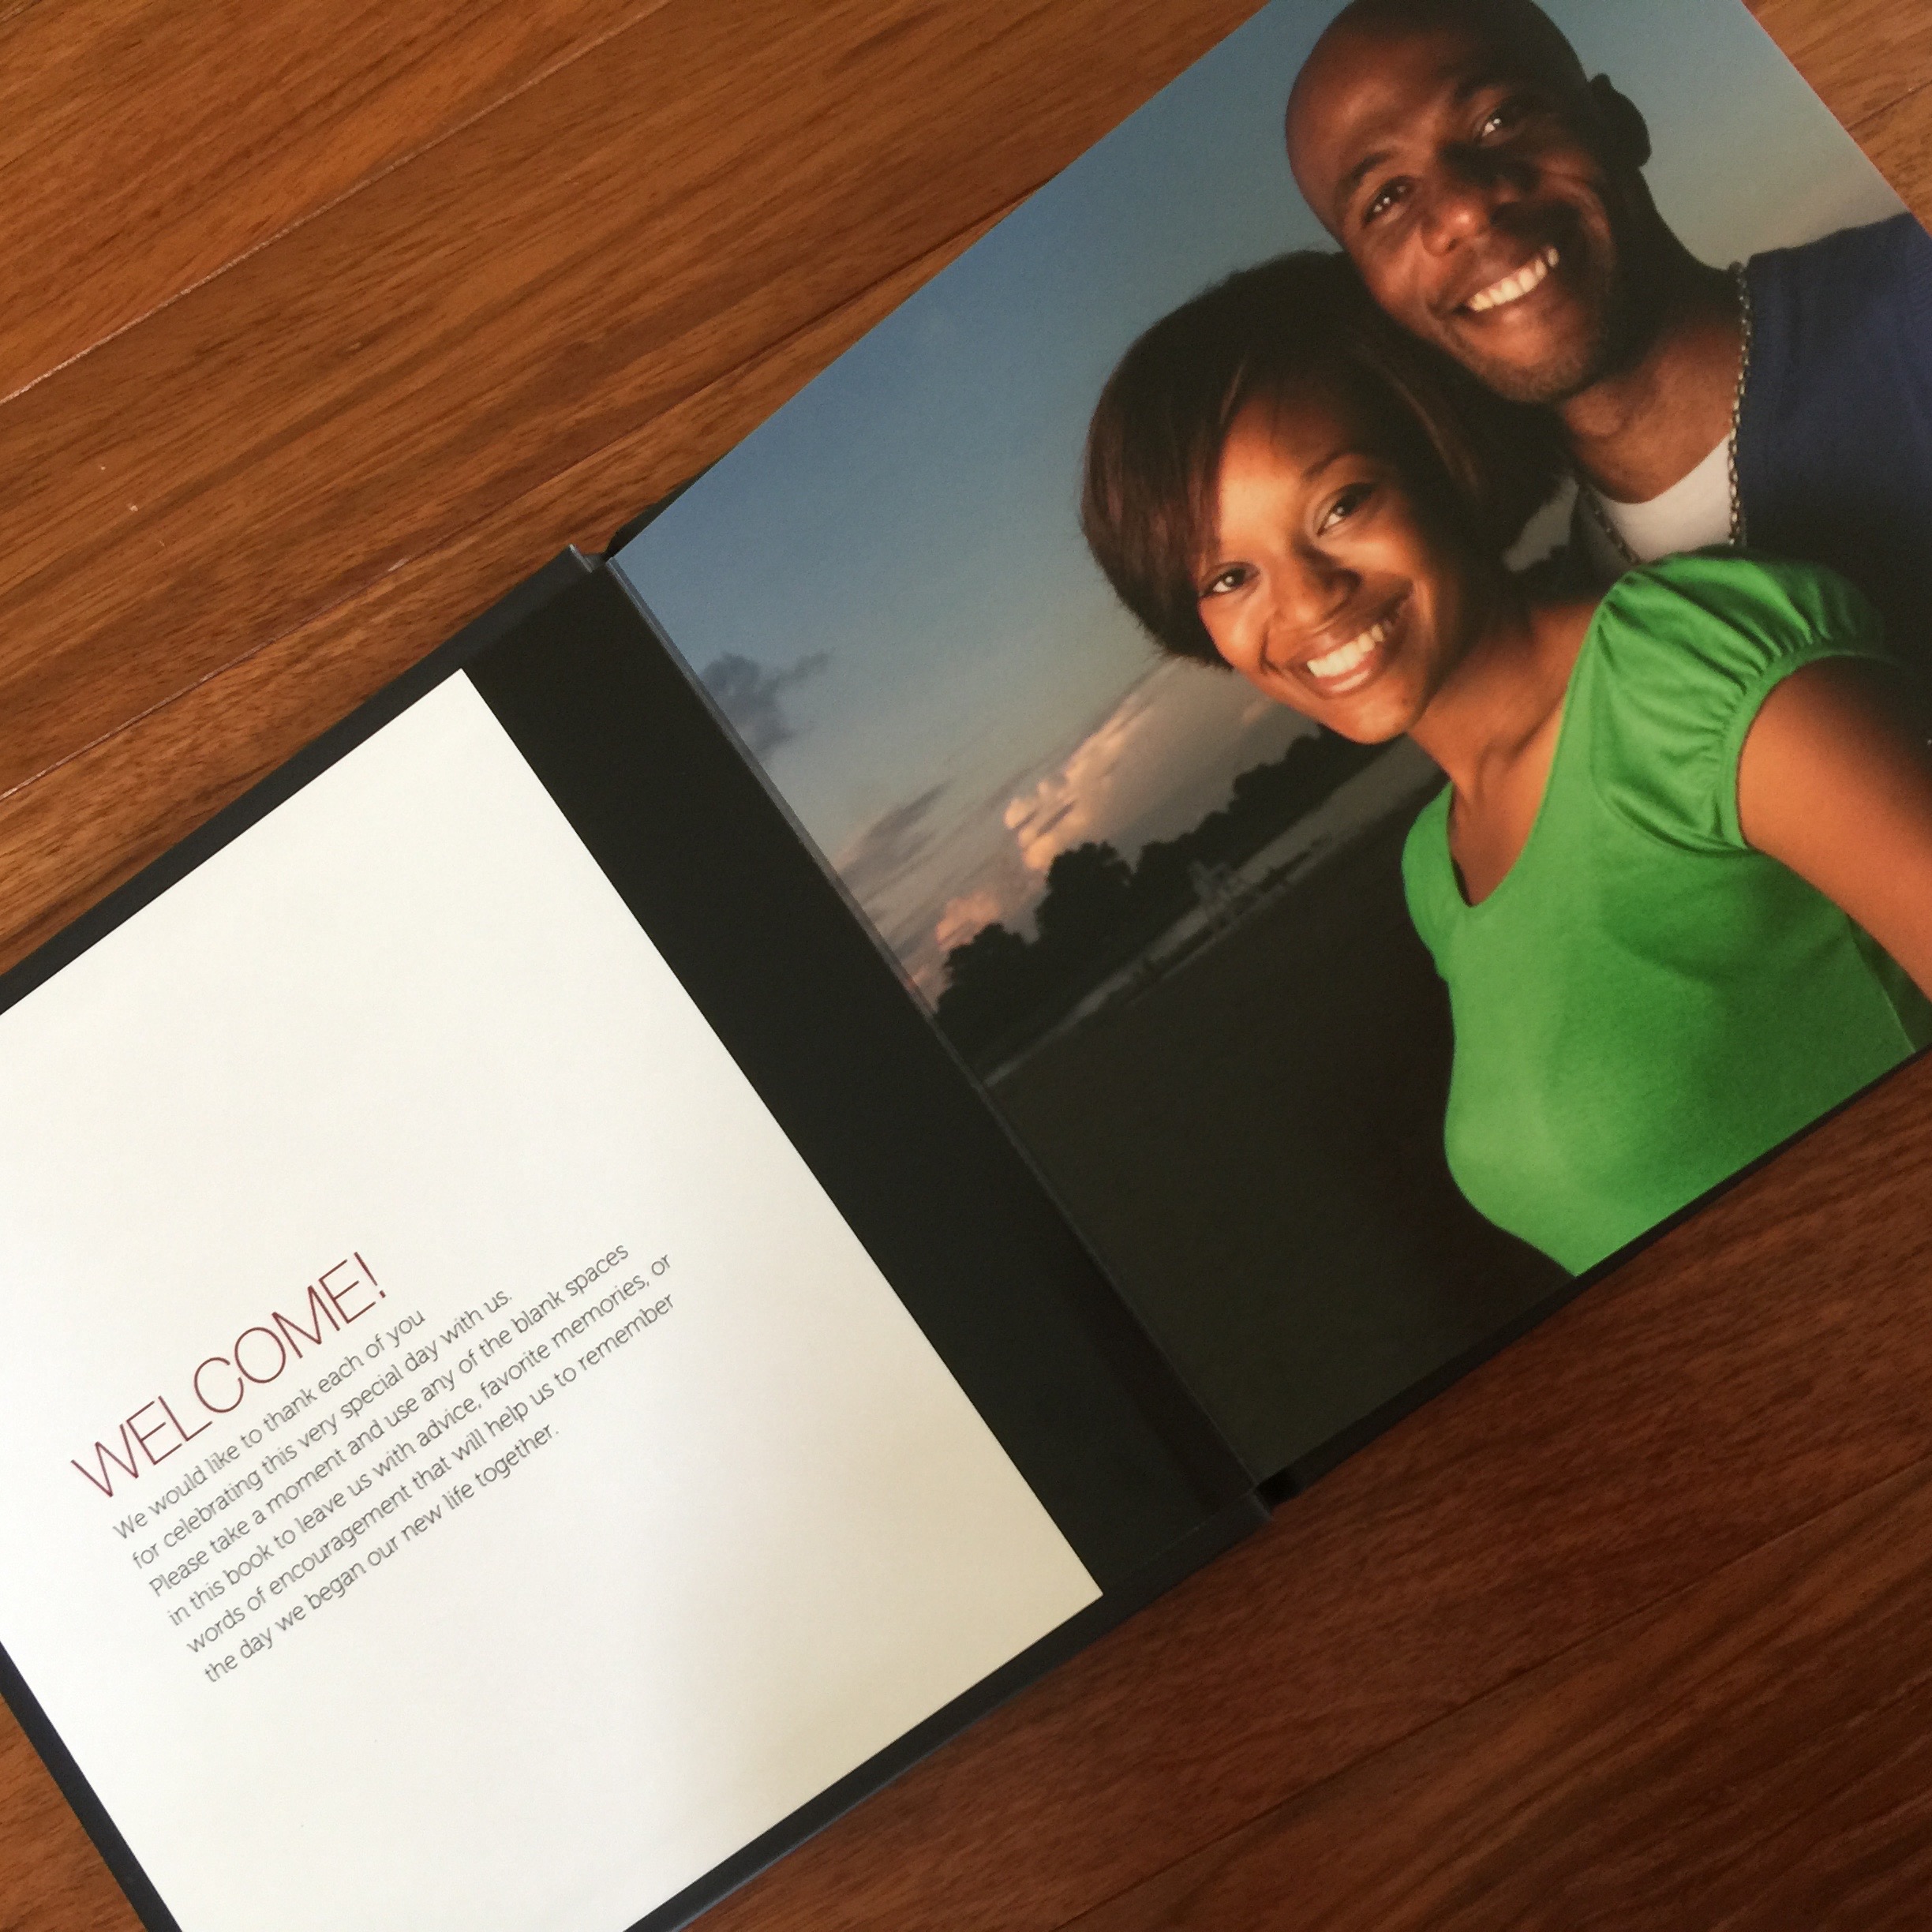 Sign in Guest Reception Book Featuring Engagement Photos